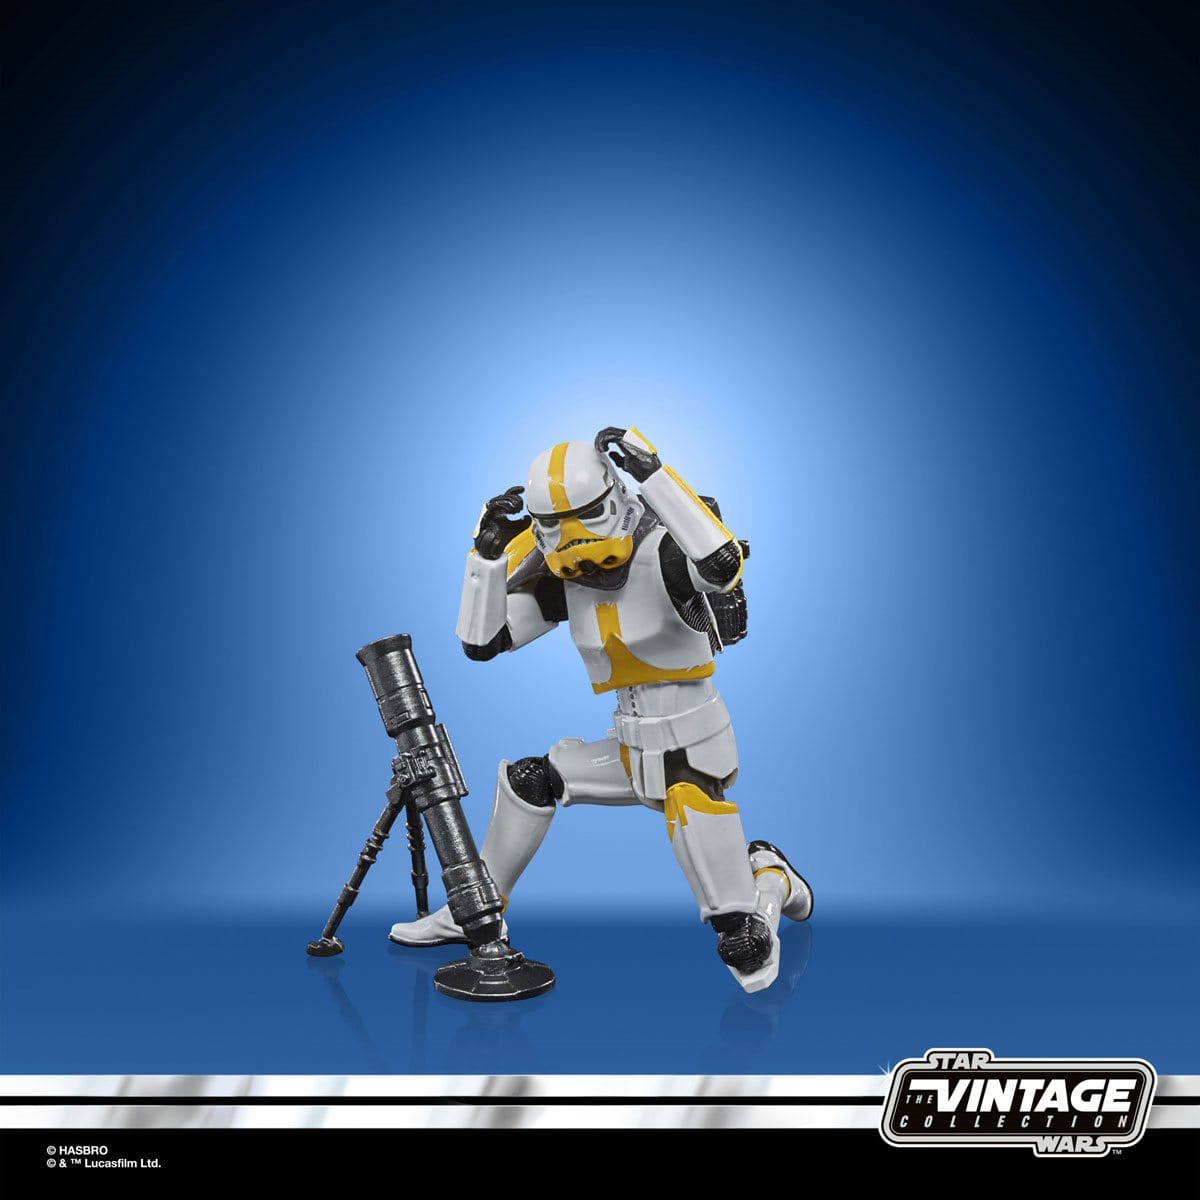 Star Wars The Vintage Collection Artillery Stormtrooper 3 3/4-Inch Action Figure Pop-O-Loco